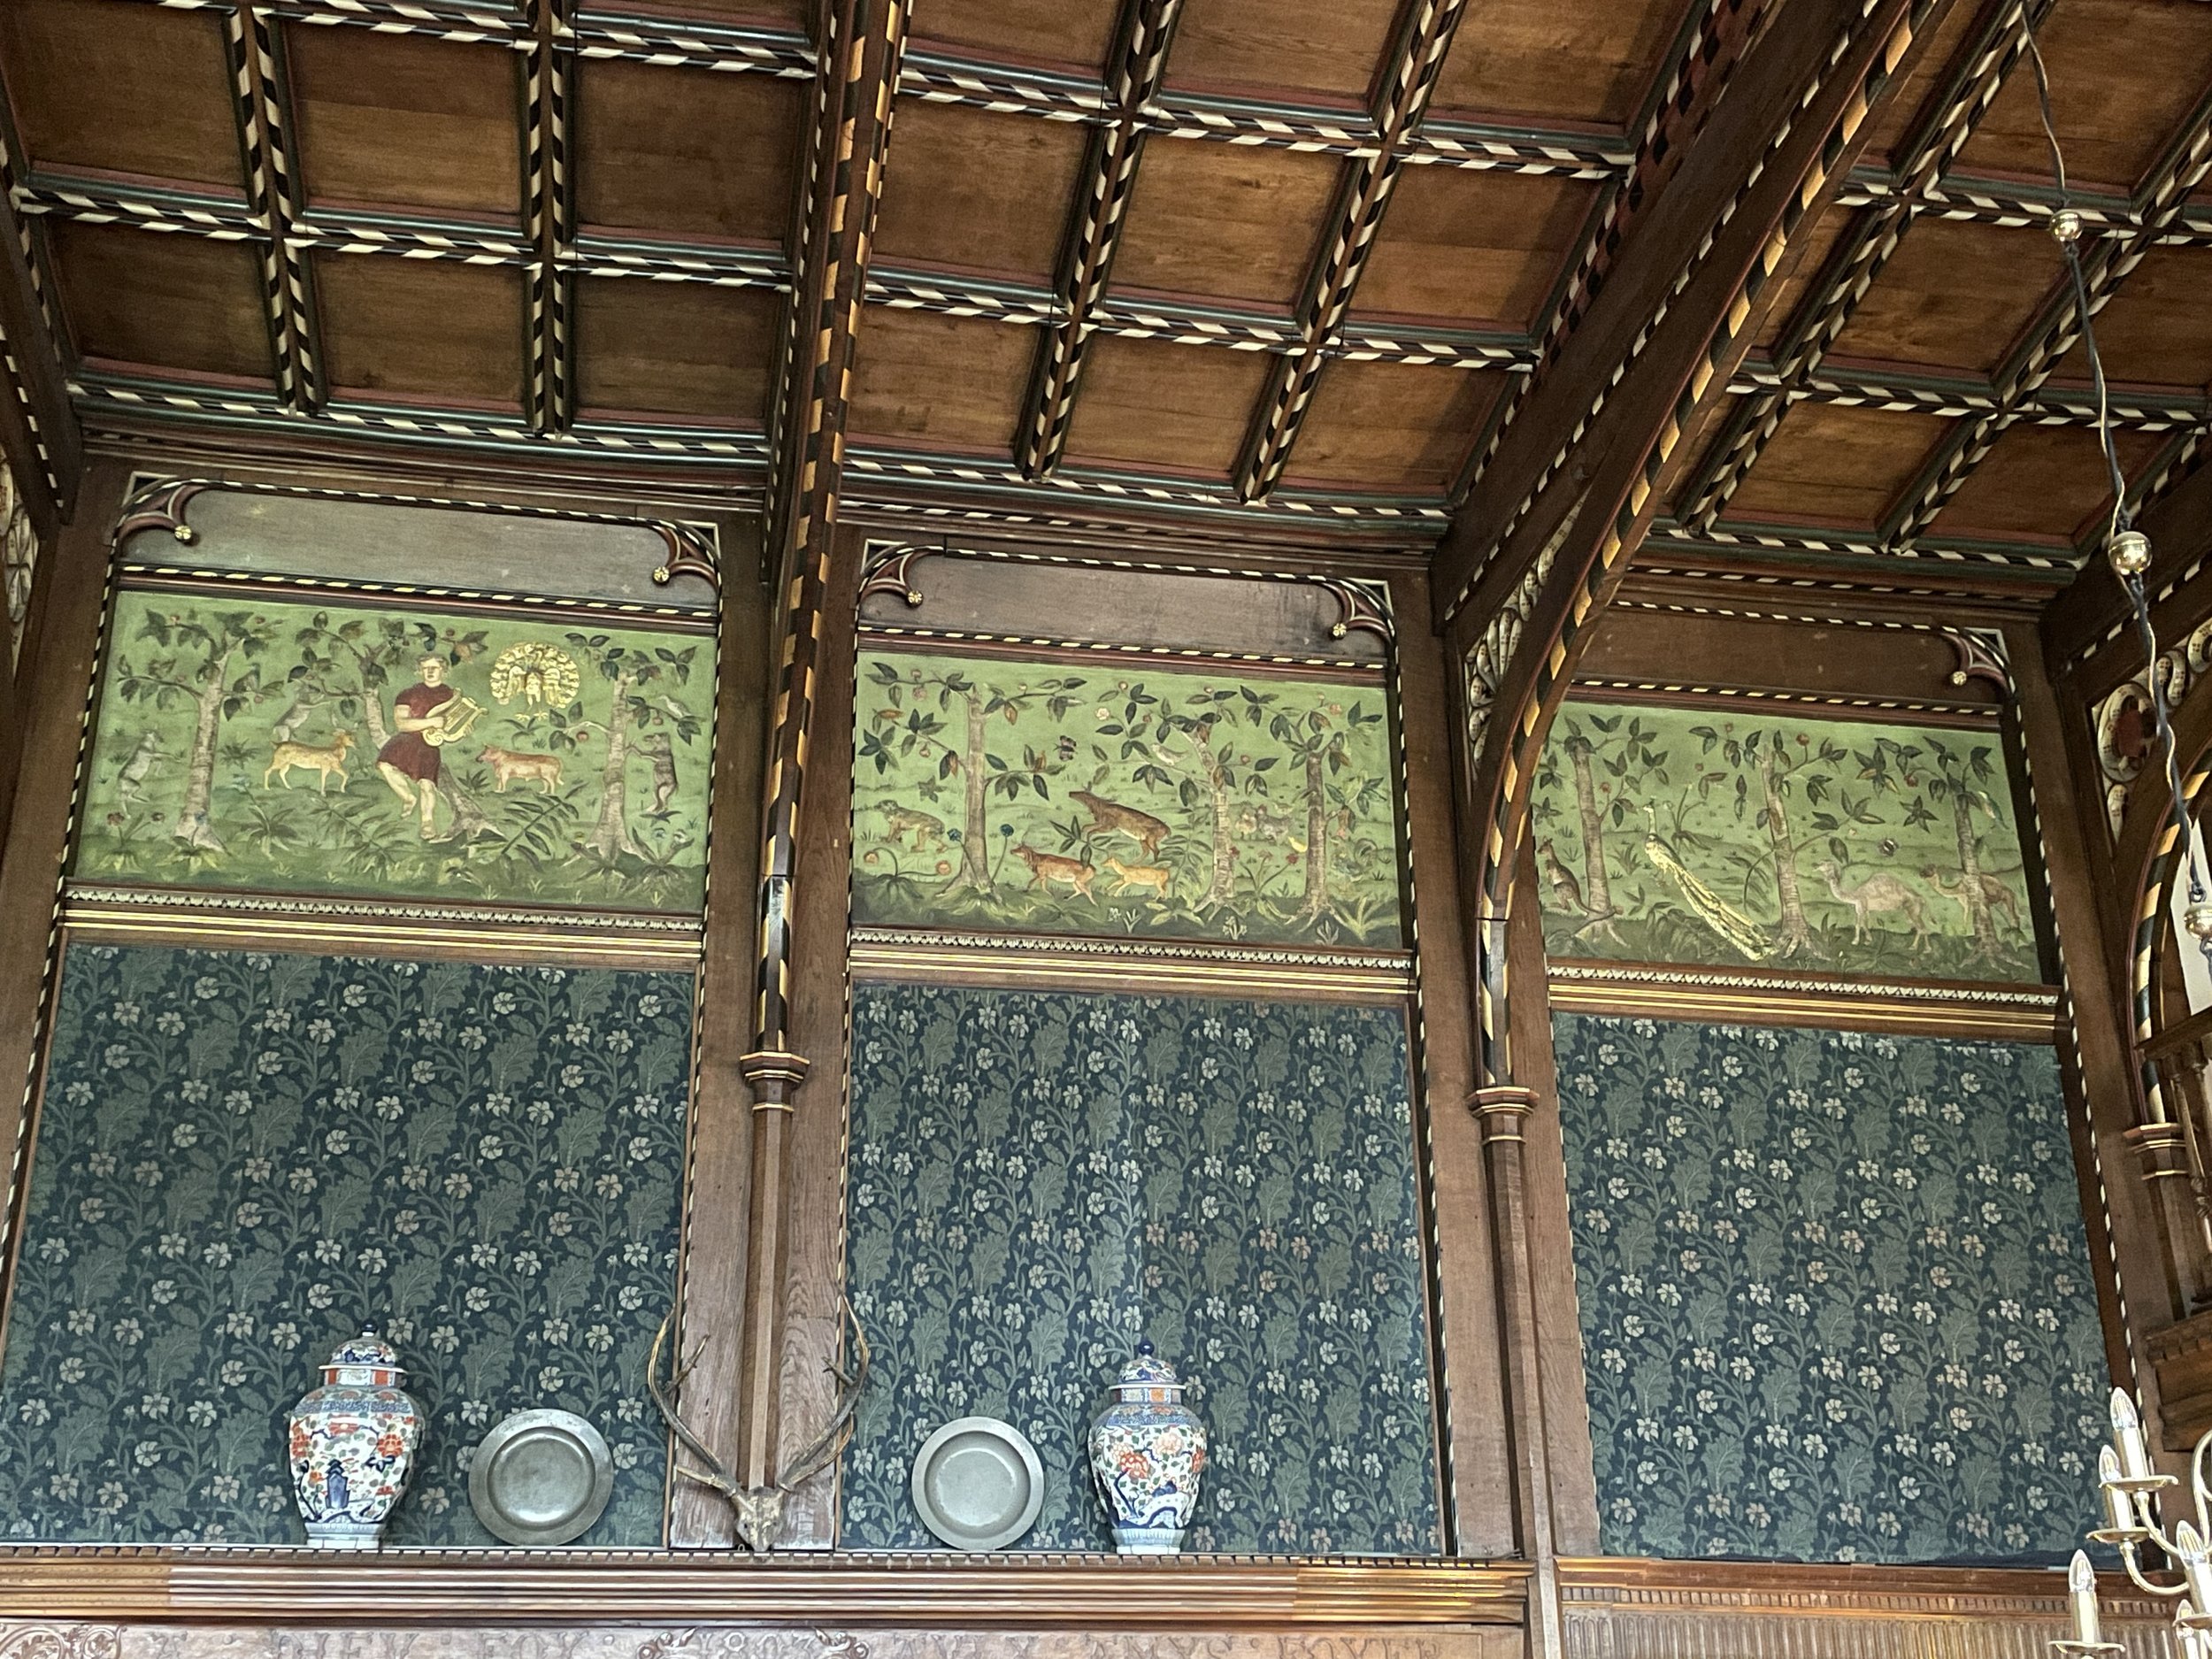  Interiors of Wightwick Manor, designed in the English Arts and Crafts style with many original fabrics and wallpapers by William Morris and his contemporaries. 